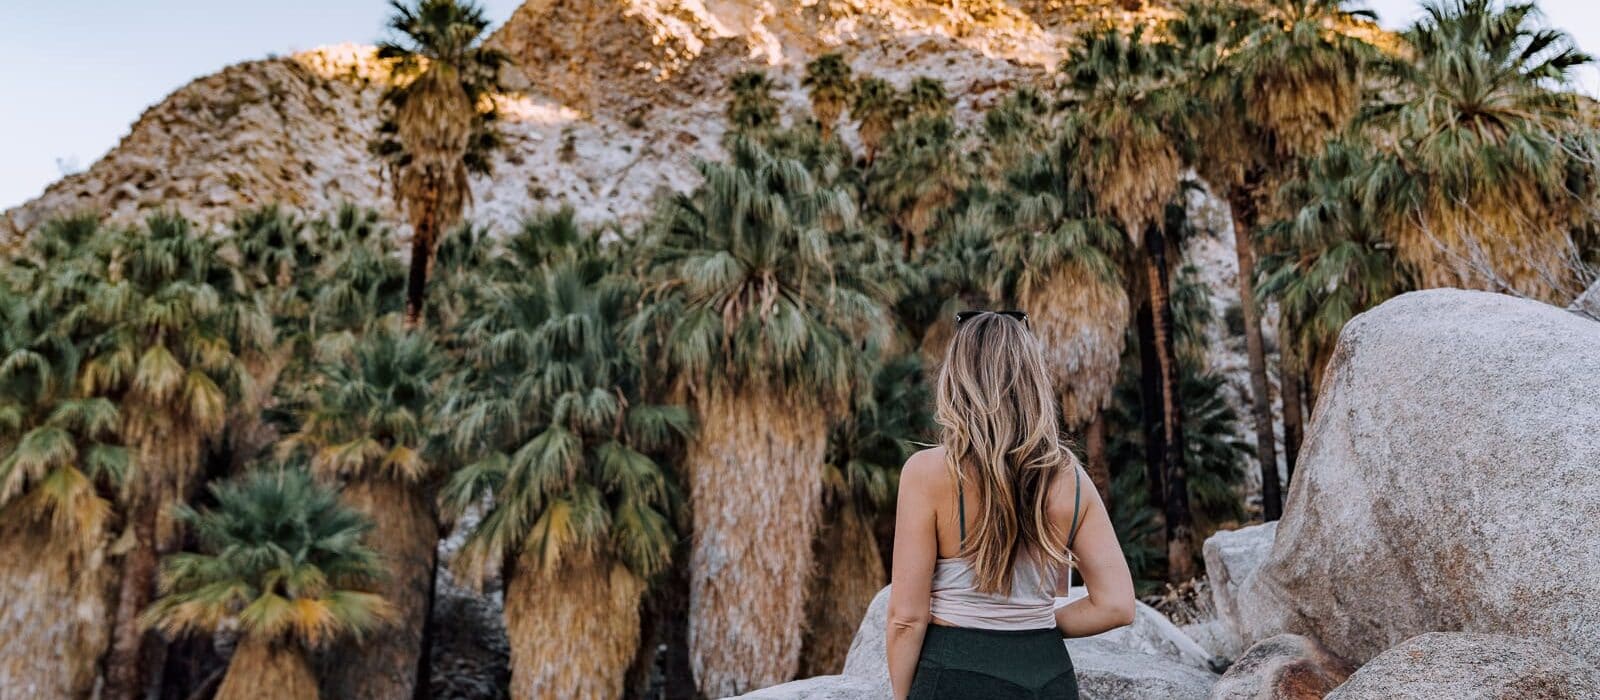 12 Best Joshua Tree Hikes According to a Backpacking Guide